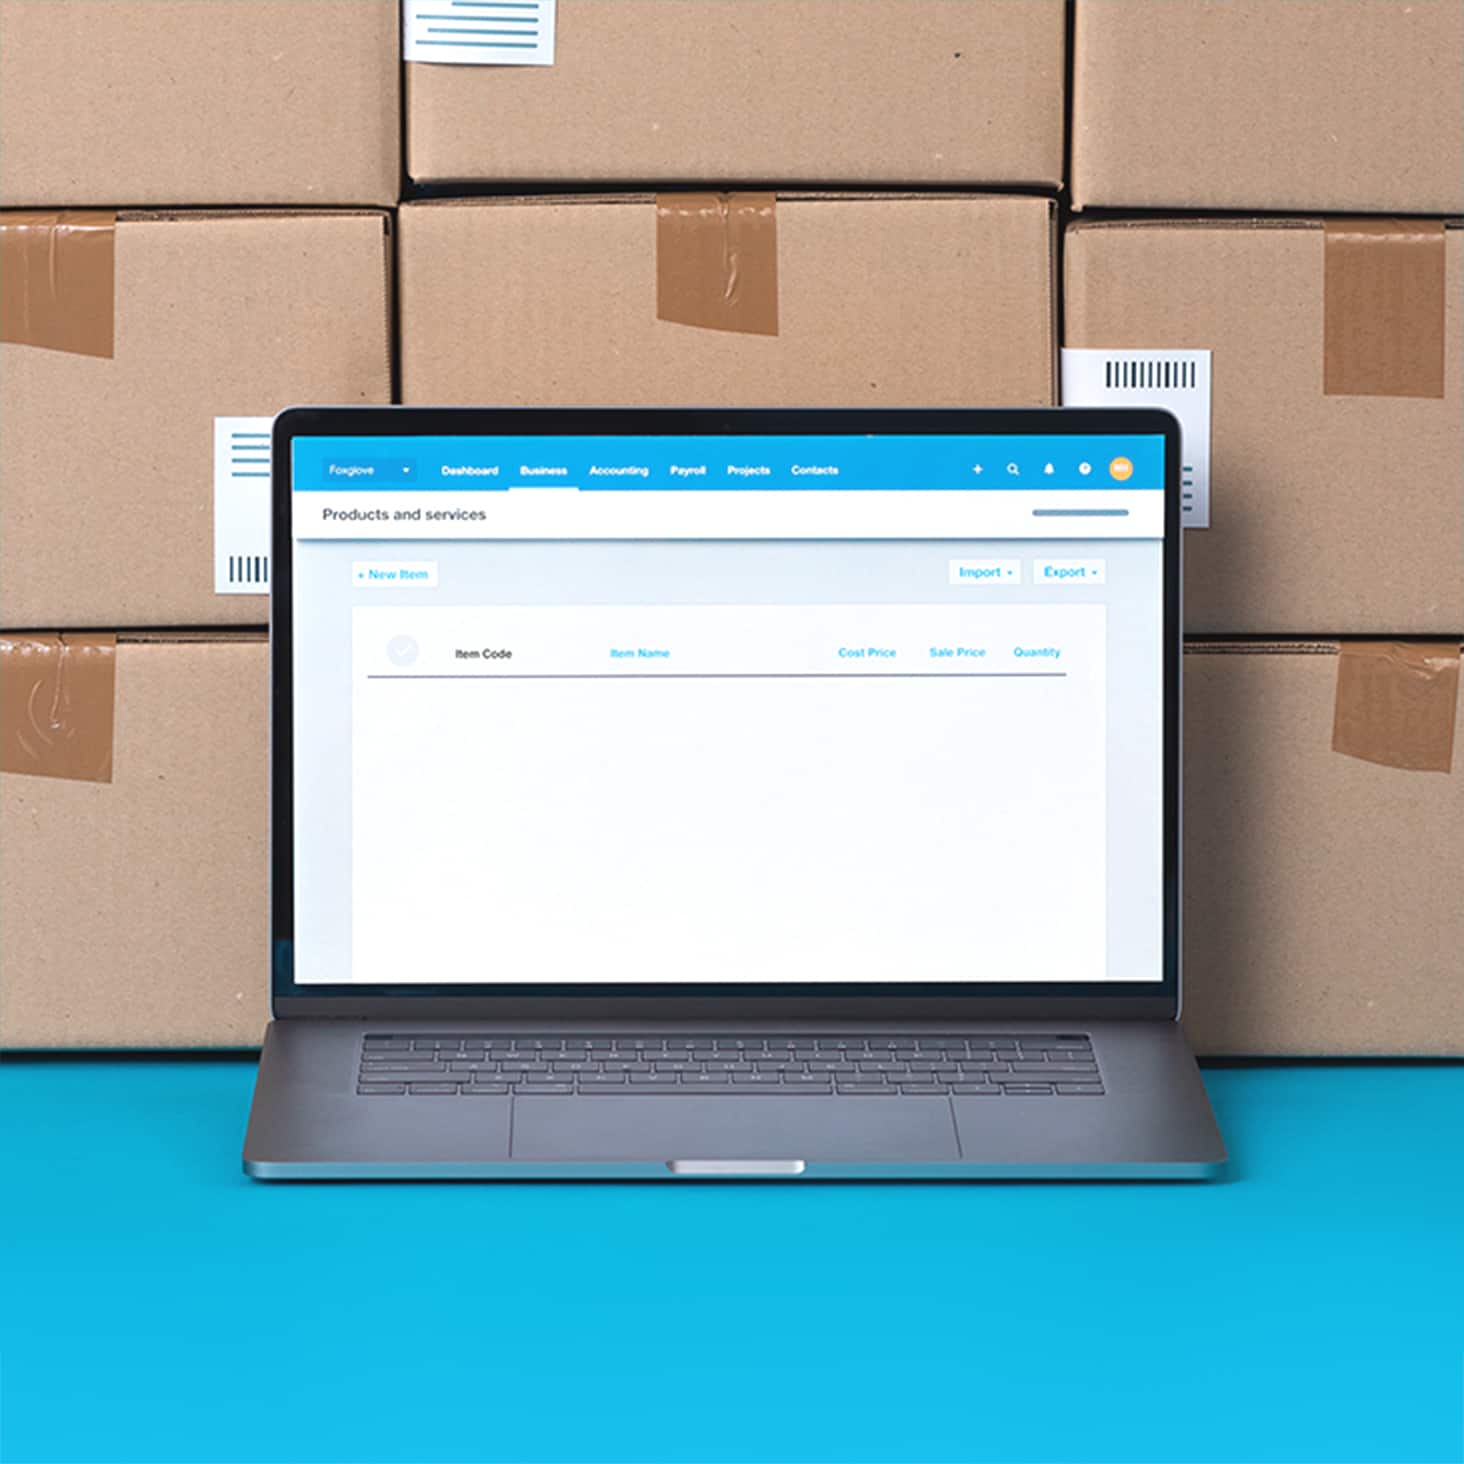 Unopened boxes containing new stock are stacked near a laptop that displays items in inventory management software.